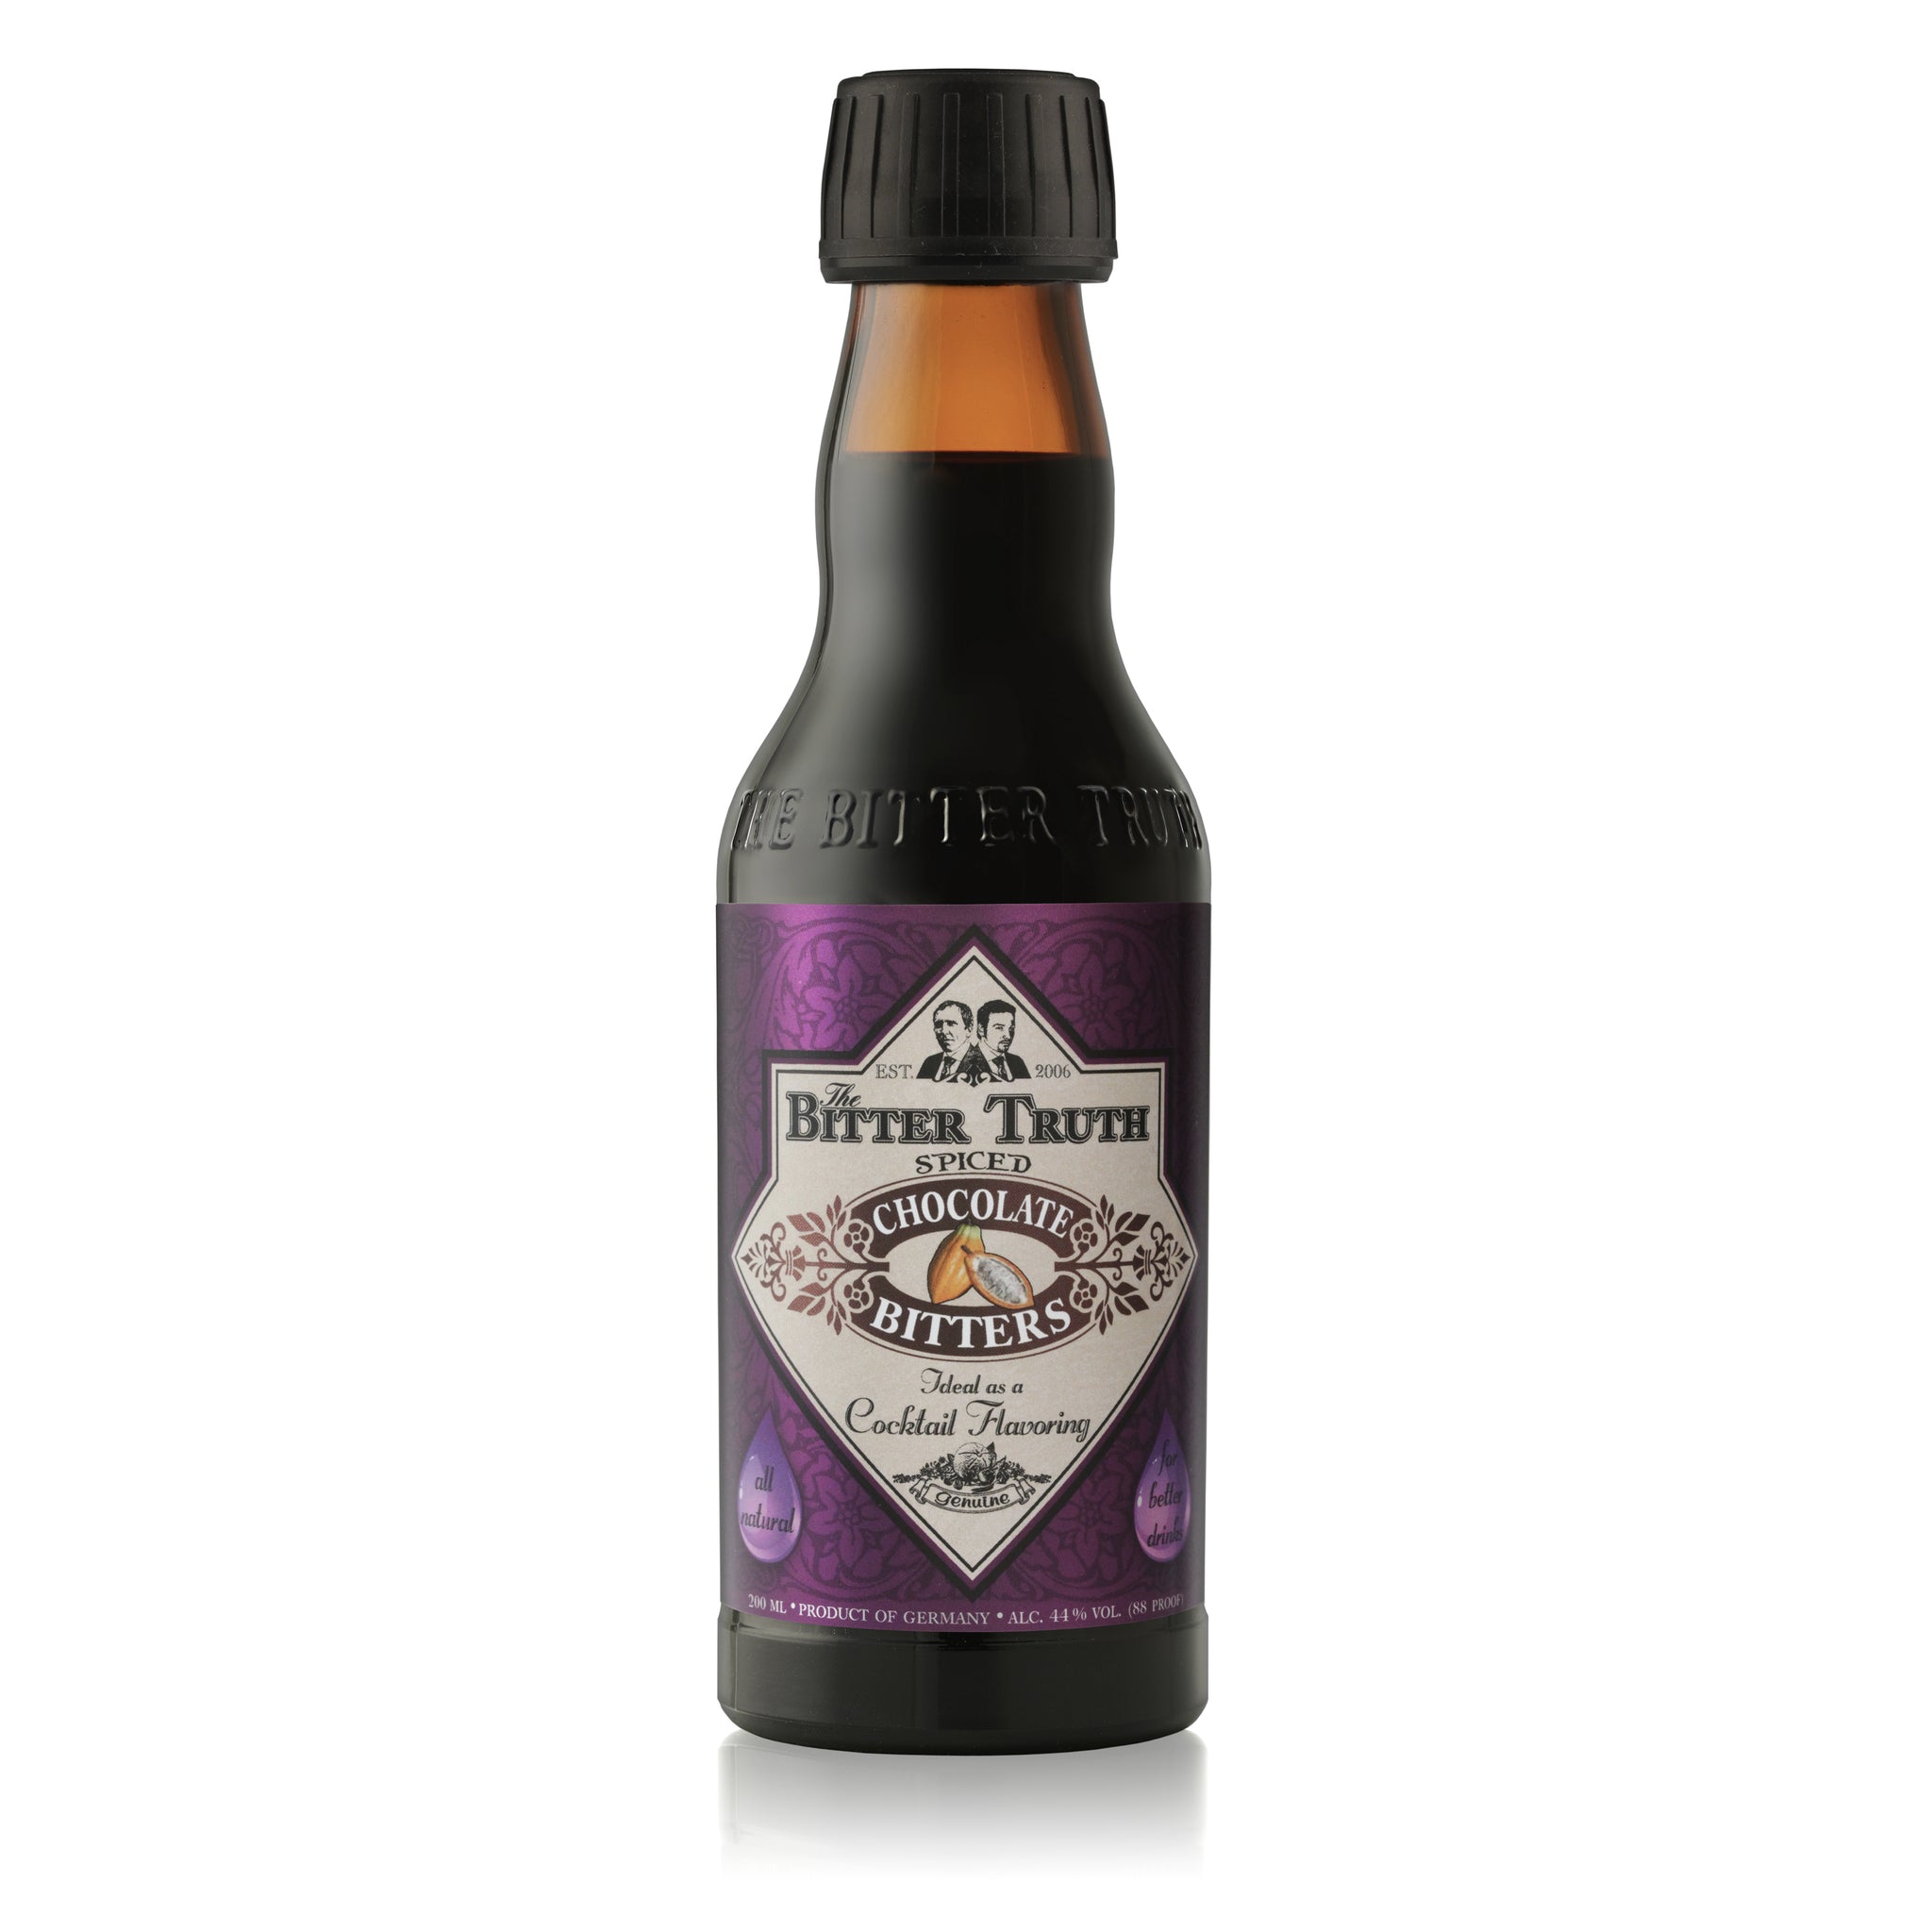 The Bitter Truth Chocolate Bitters